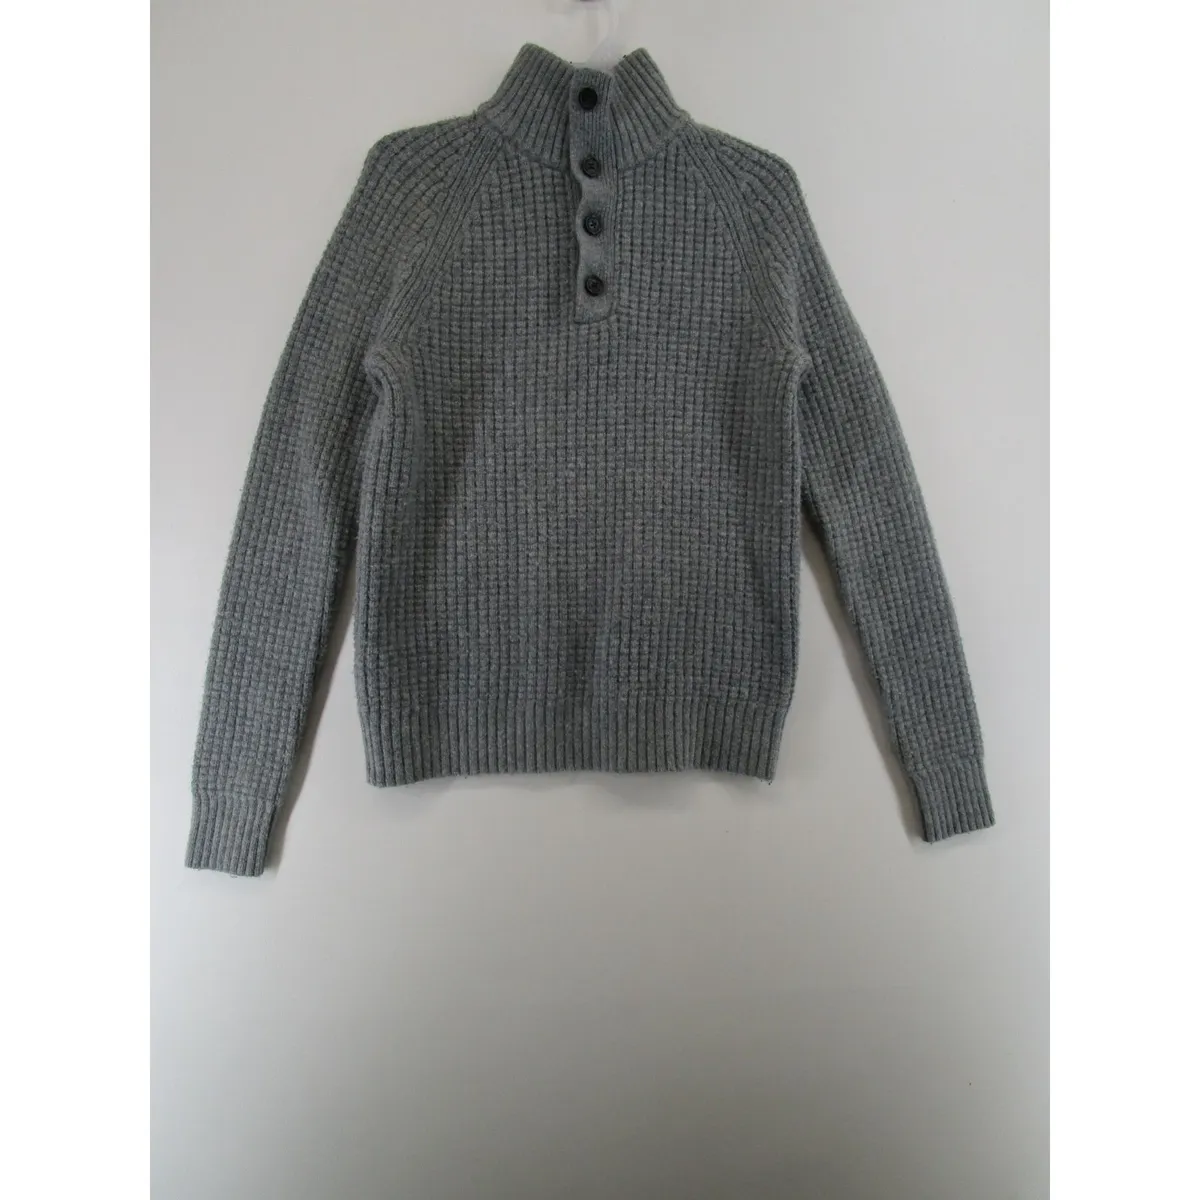 GAP Mens S Pullover Long Sleeve High Neck Waffle Knit Sweater Gray